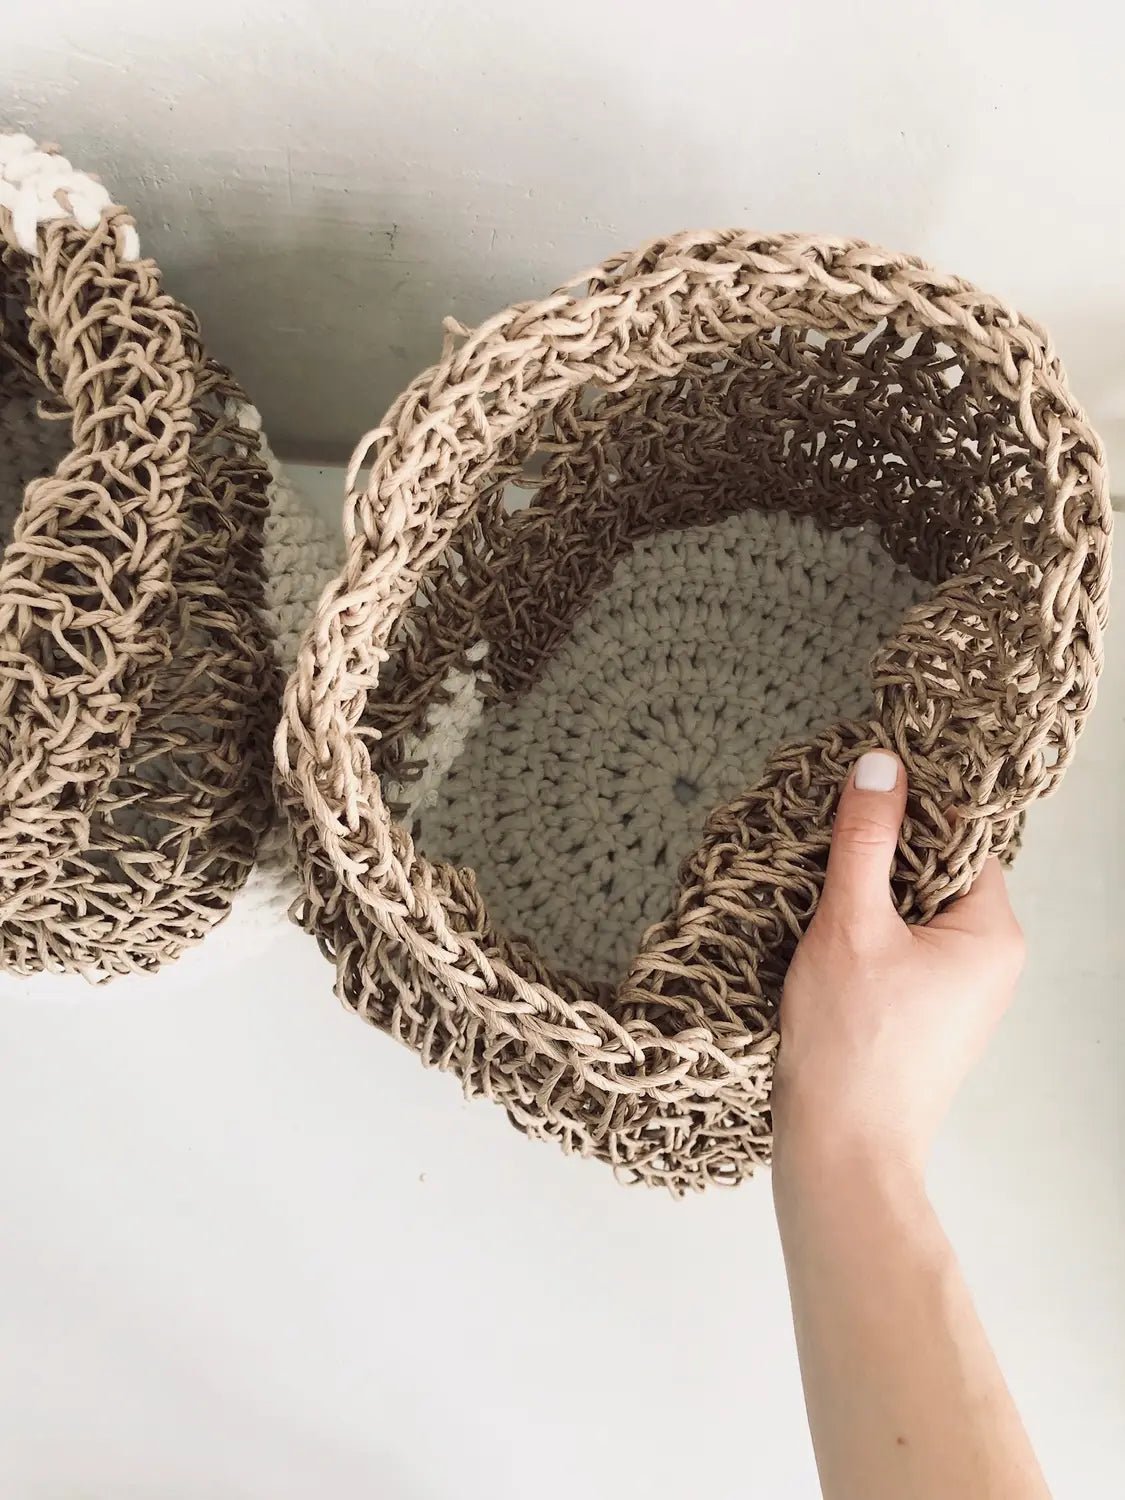 ZAGRAVA HAND-WOVEN BASKET WHITE AND BEIGE - The Modern Heritage